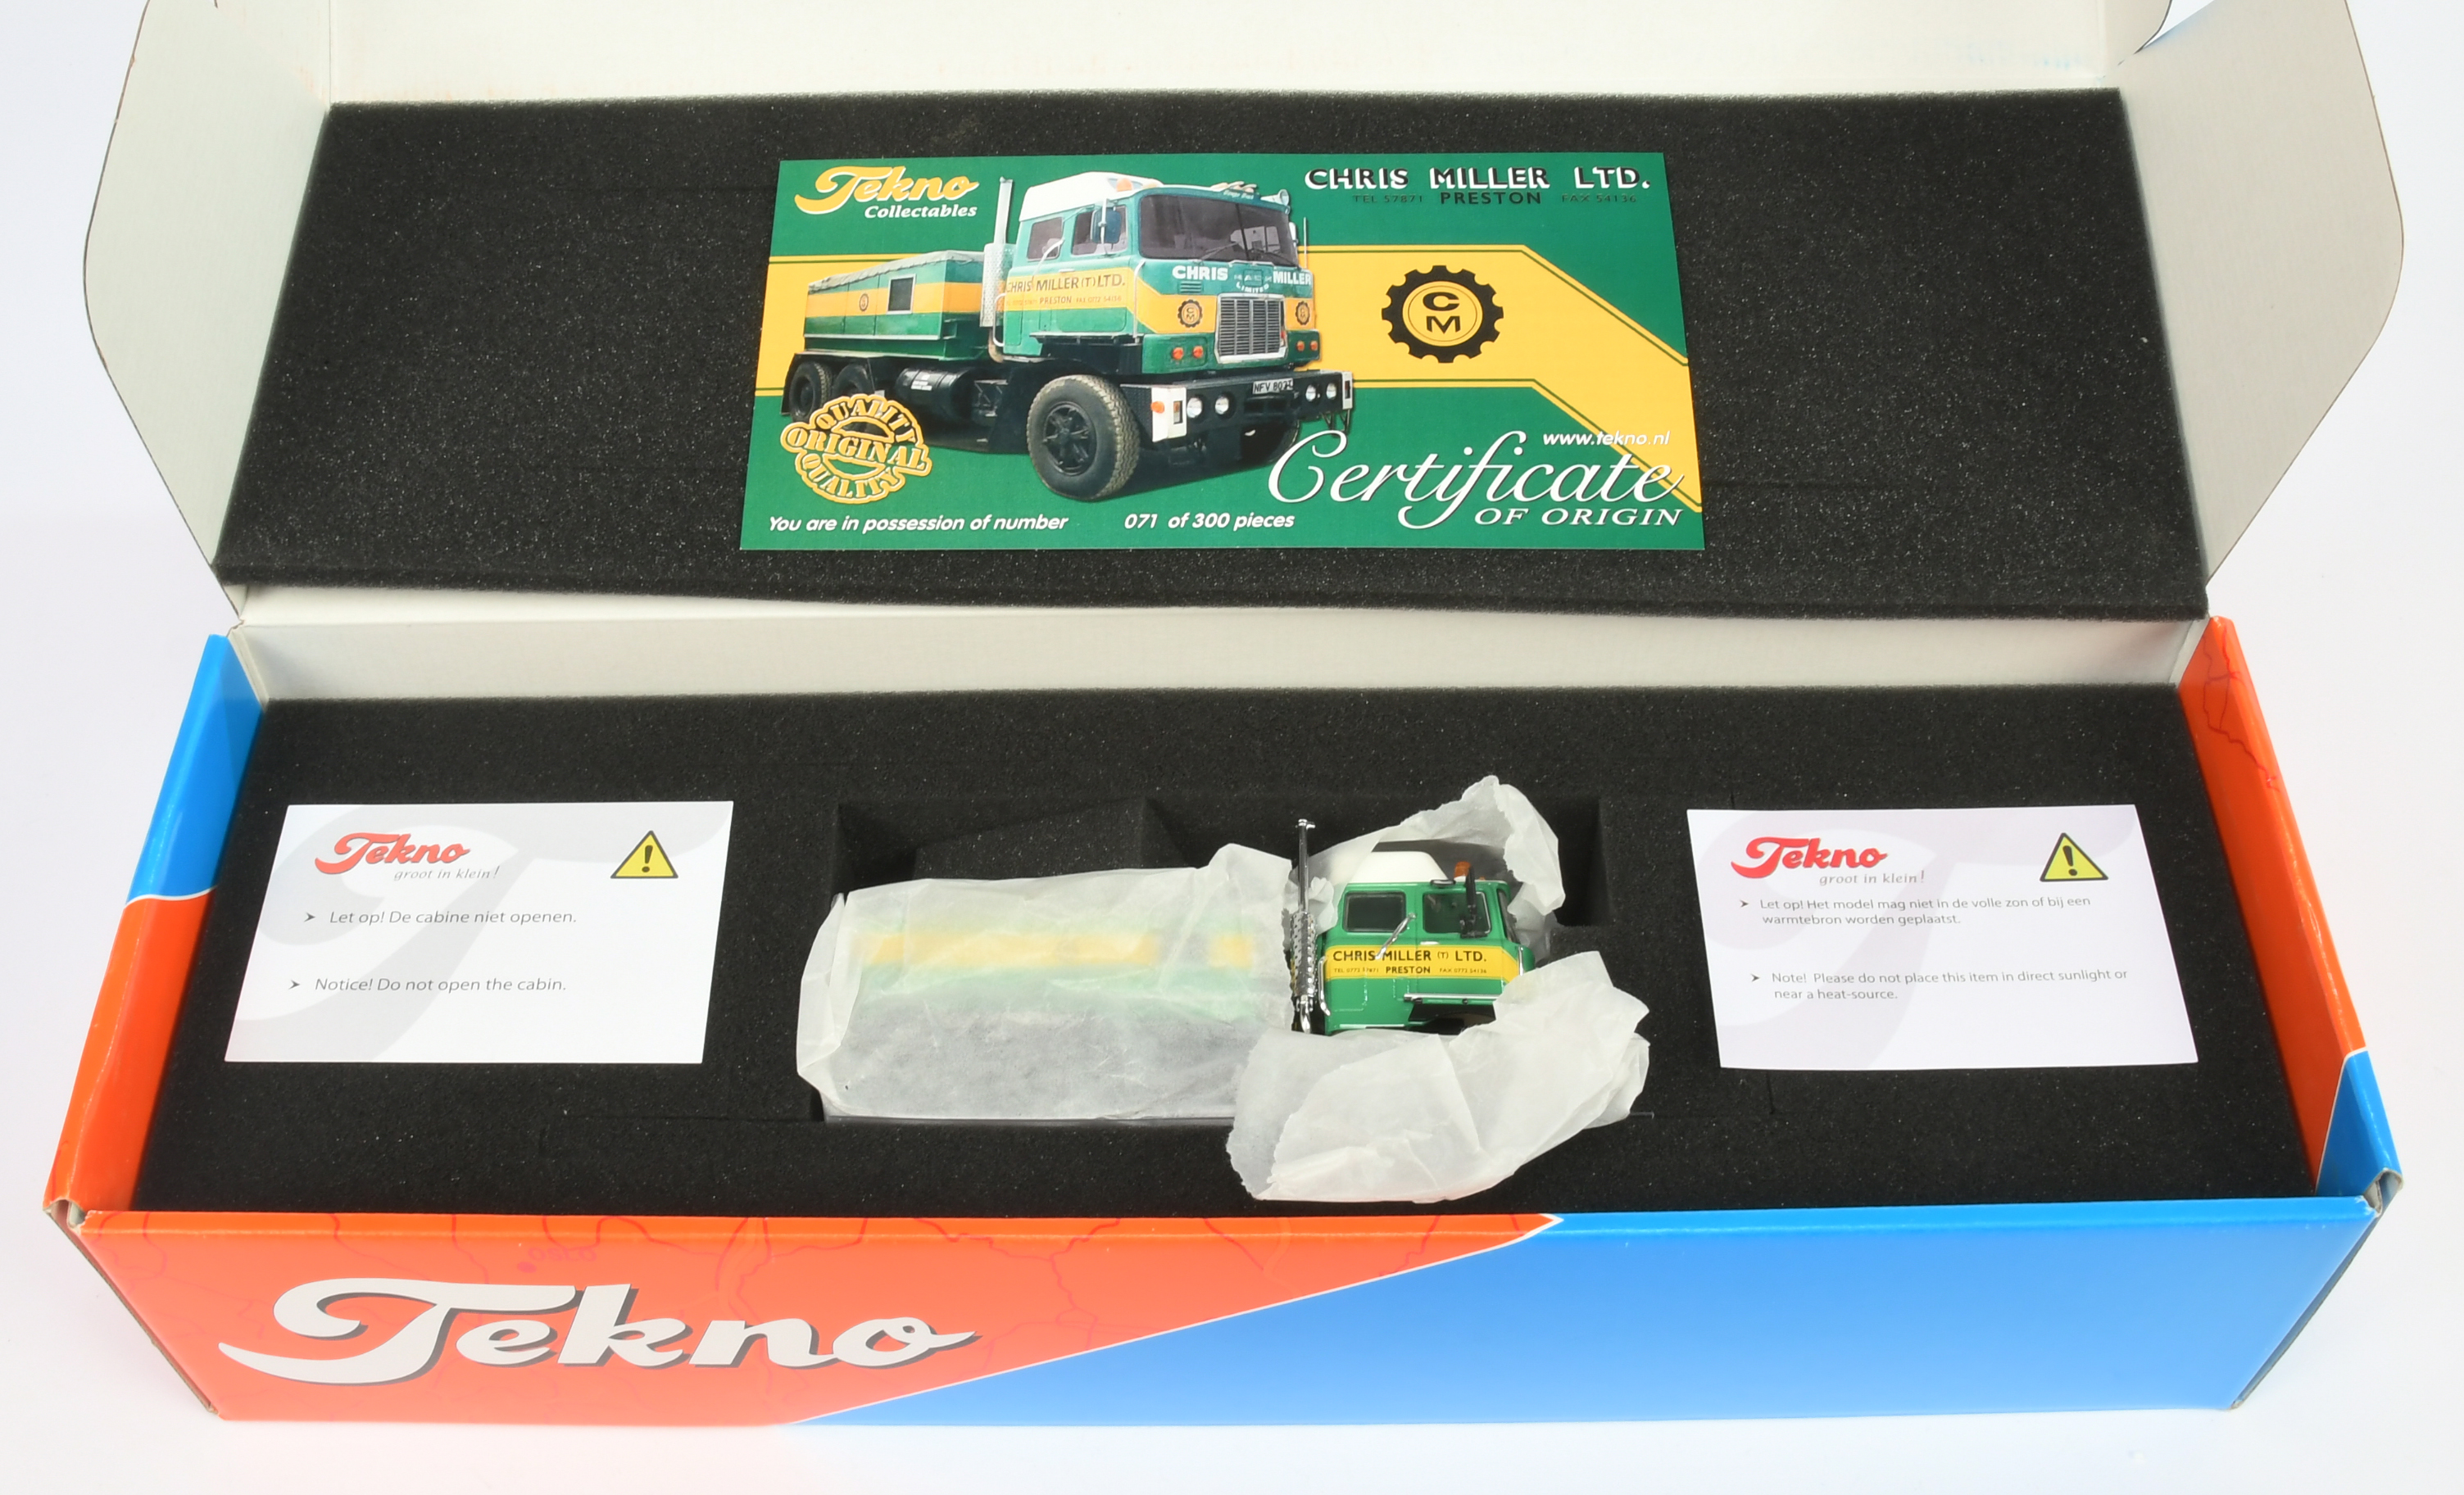 Tekno (1/50th) Mack 1700 6 X 4 Ballast "Chris Miller Ltd" - Green and yellow - Mint in a Excellen...